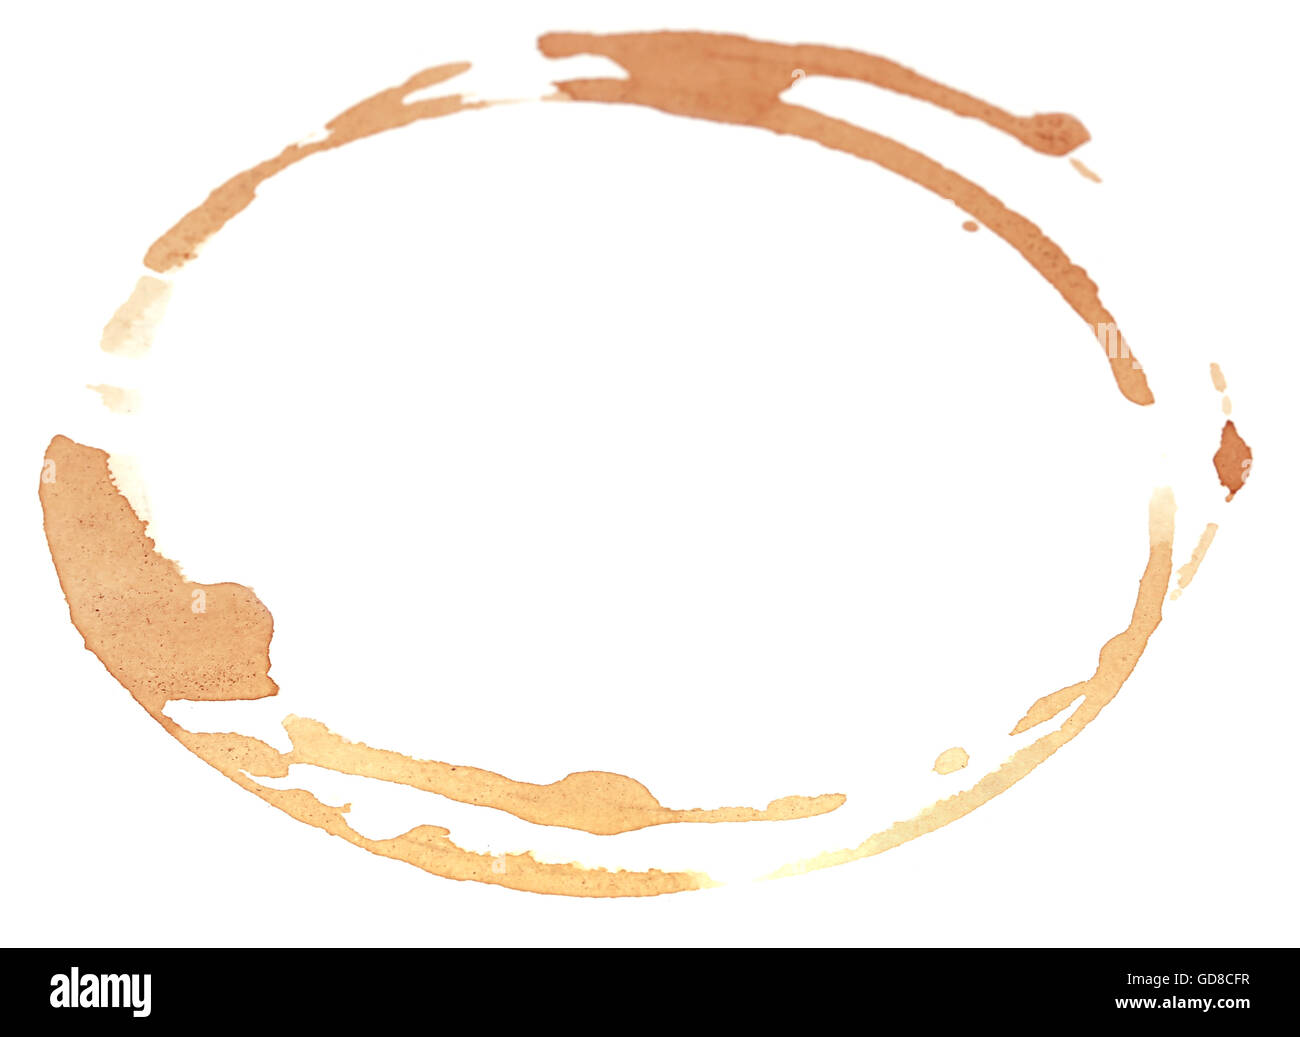 Coffee stain over white background Stock Photo